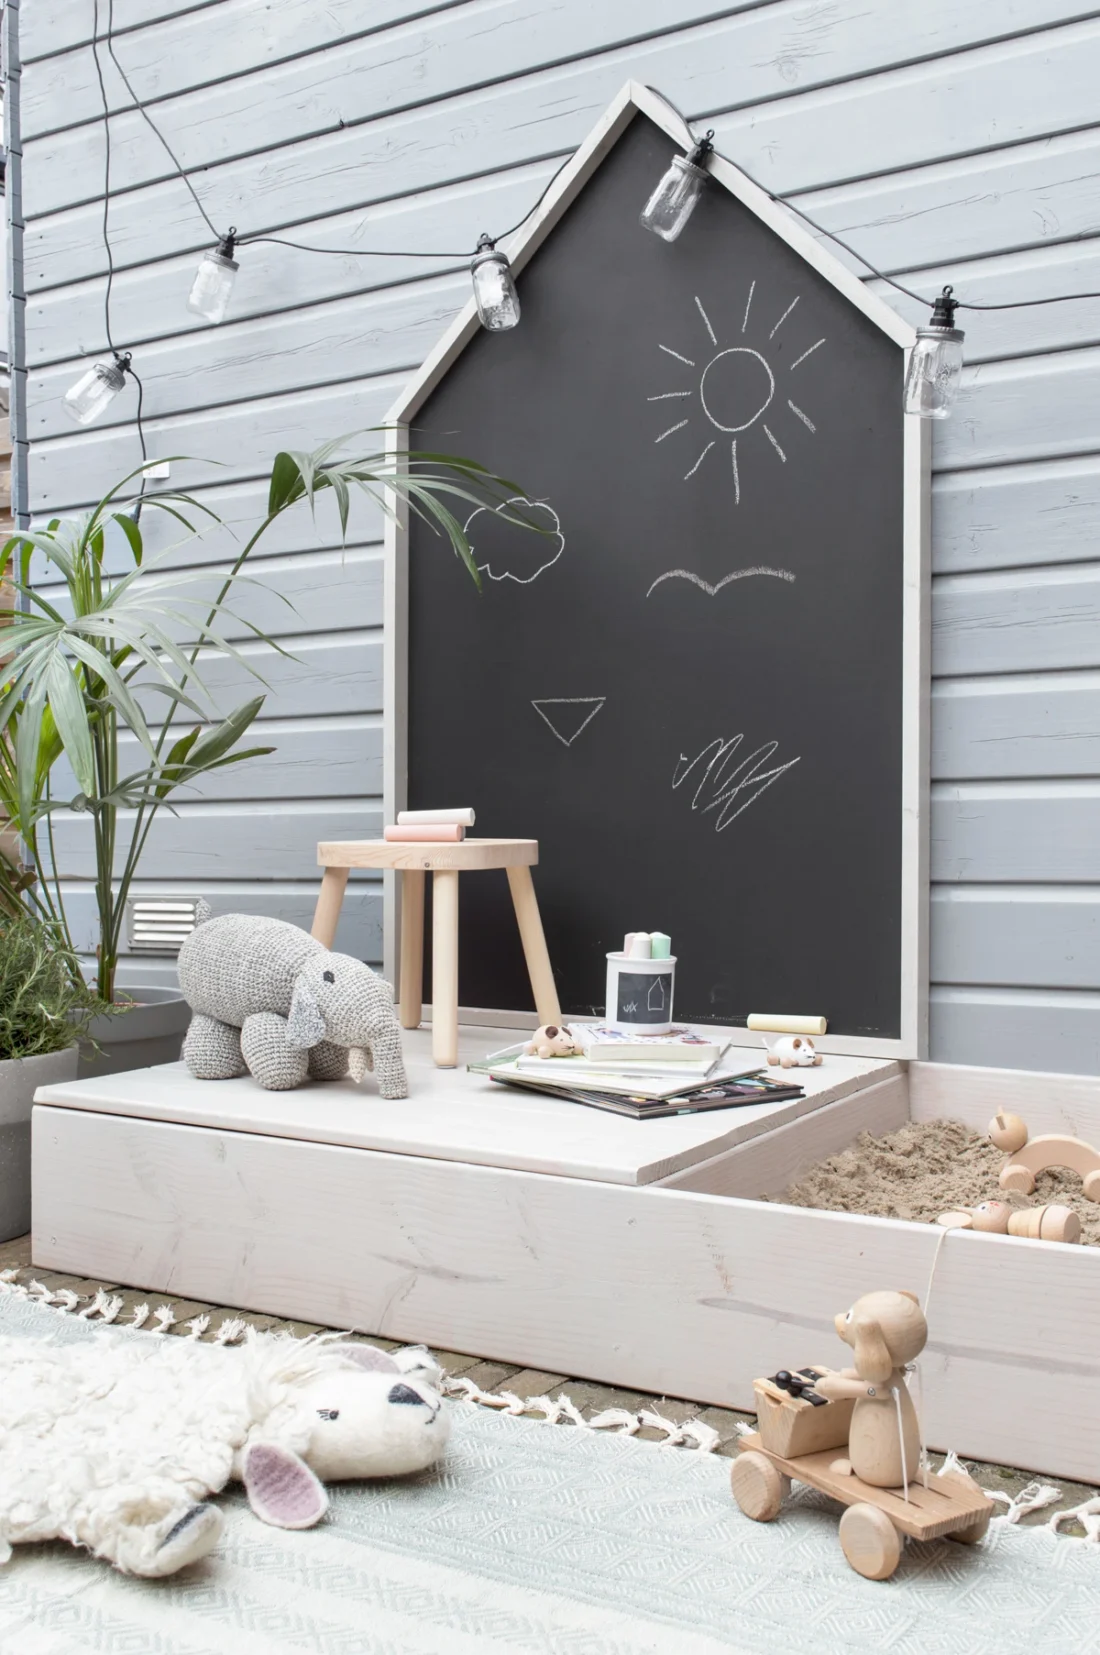 A sandbox with toys and a chalkboard.